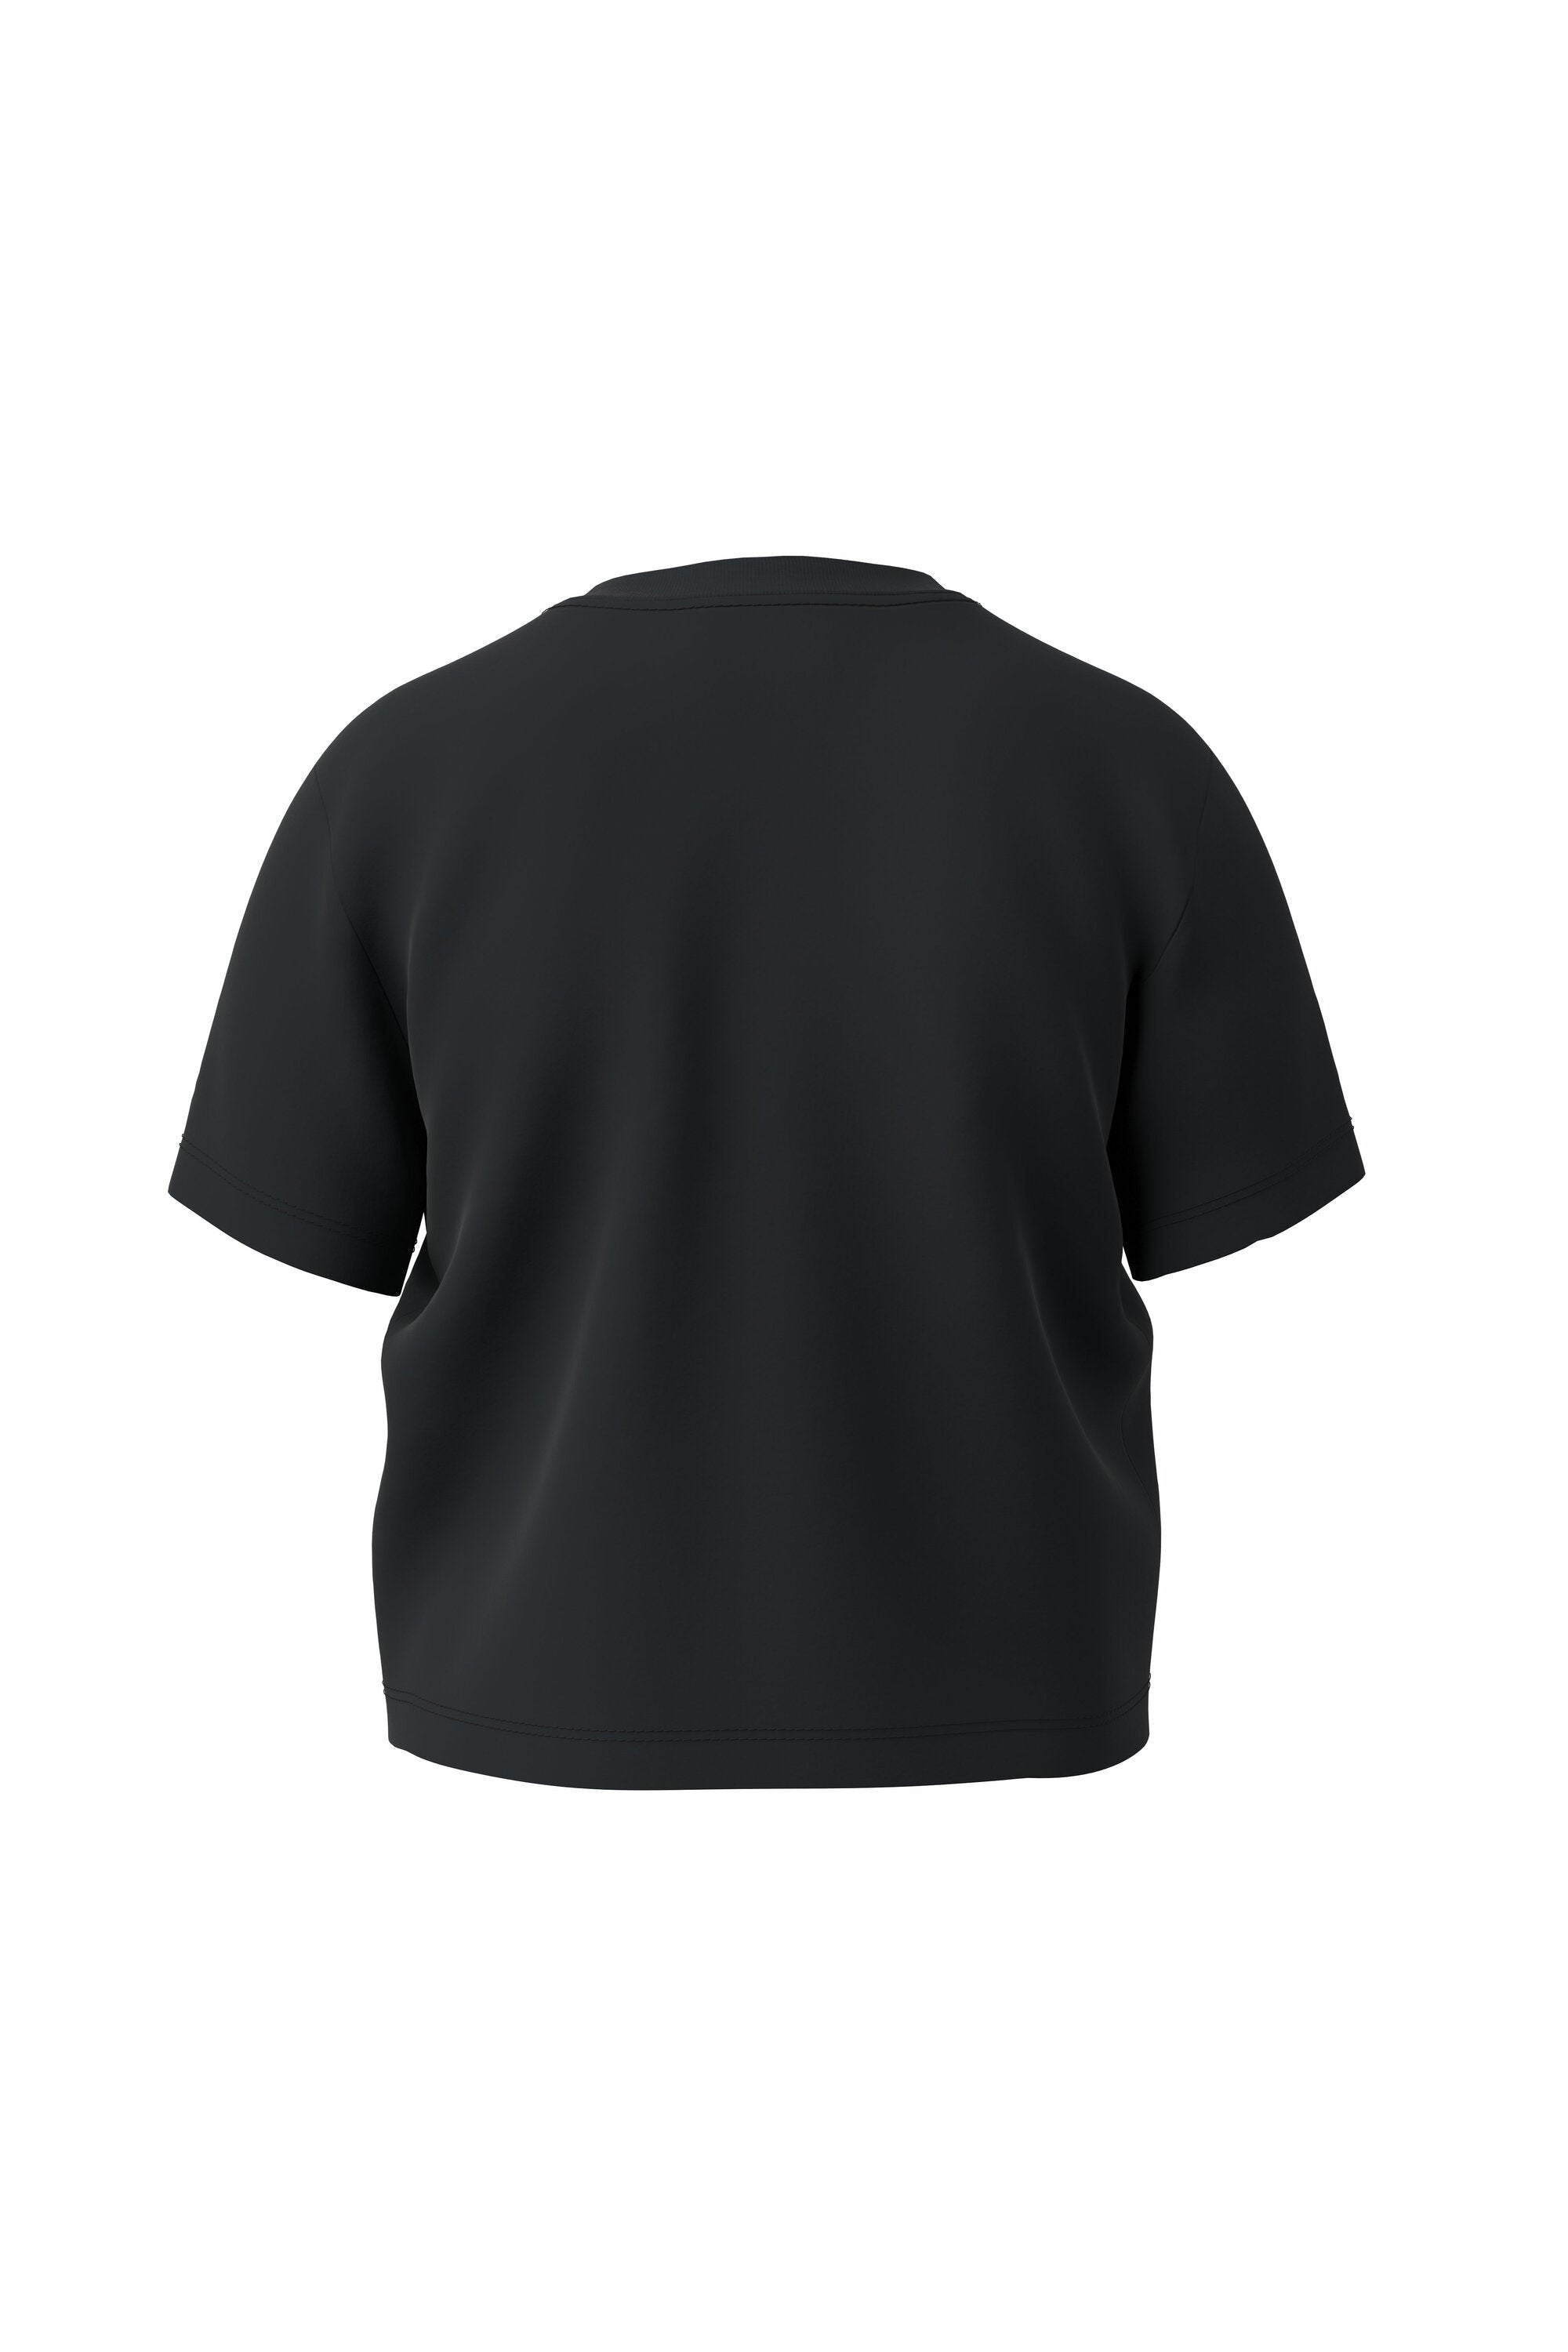 Black T-shirt with heart-shaped D logo